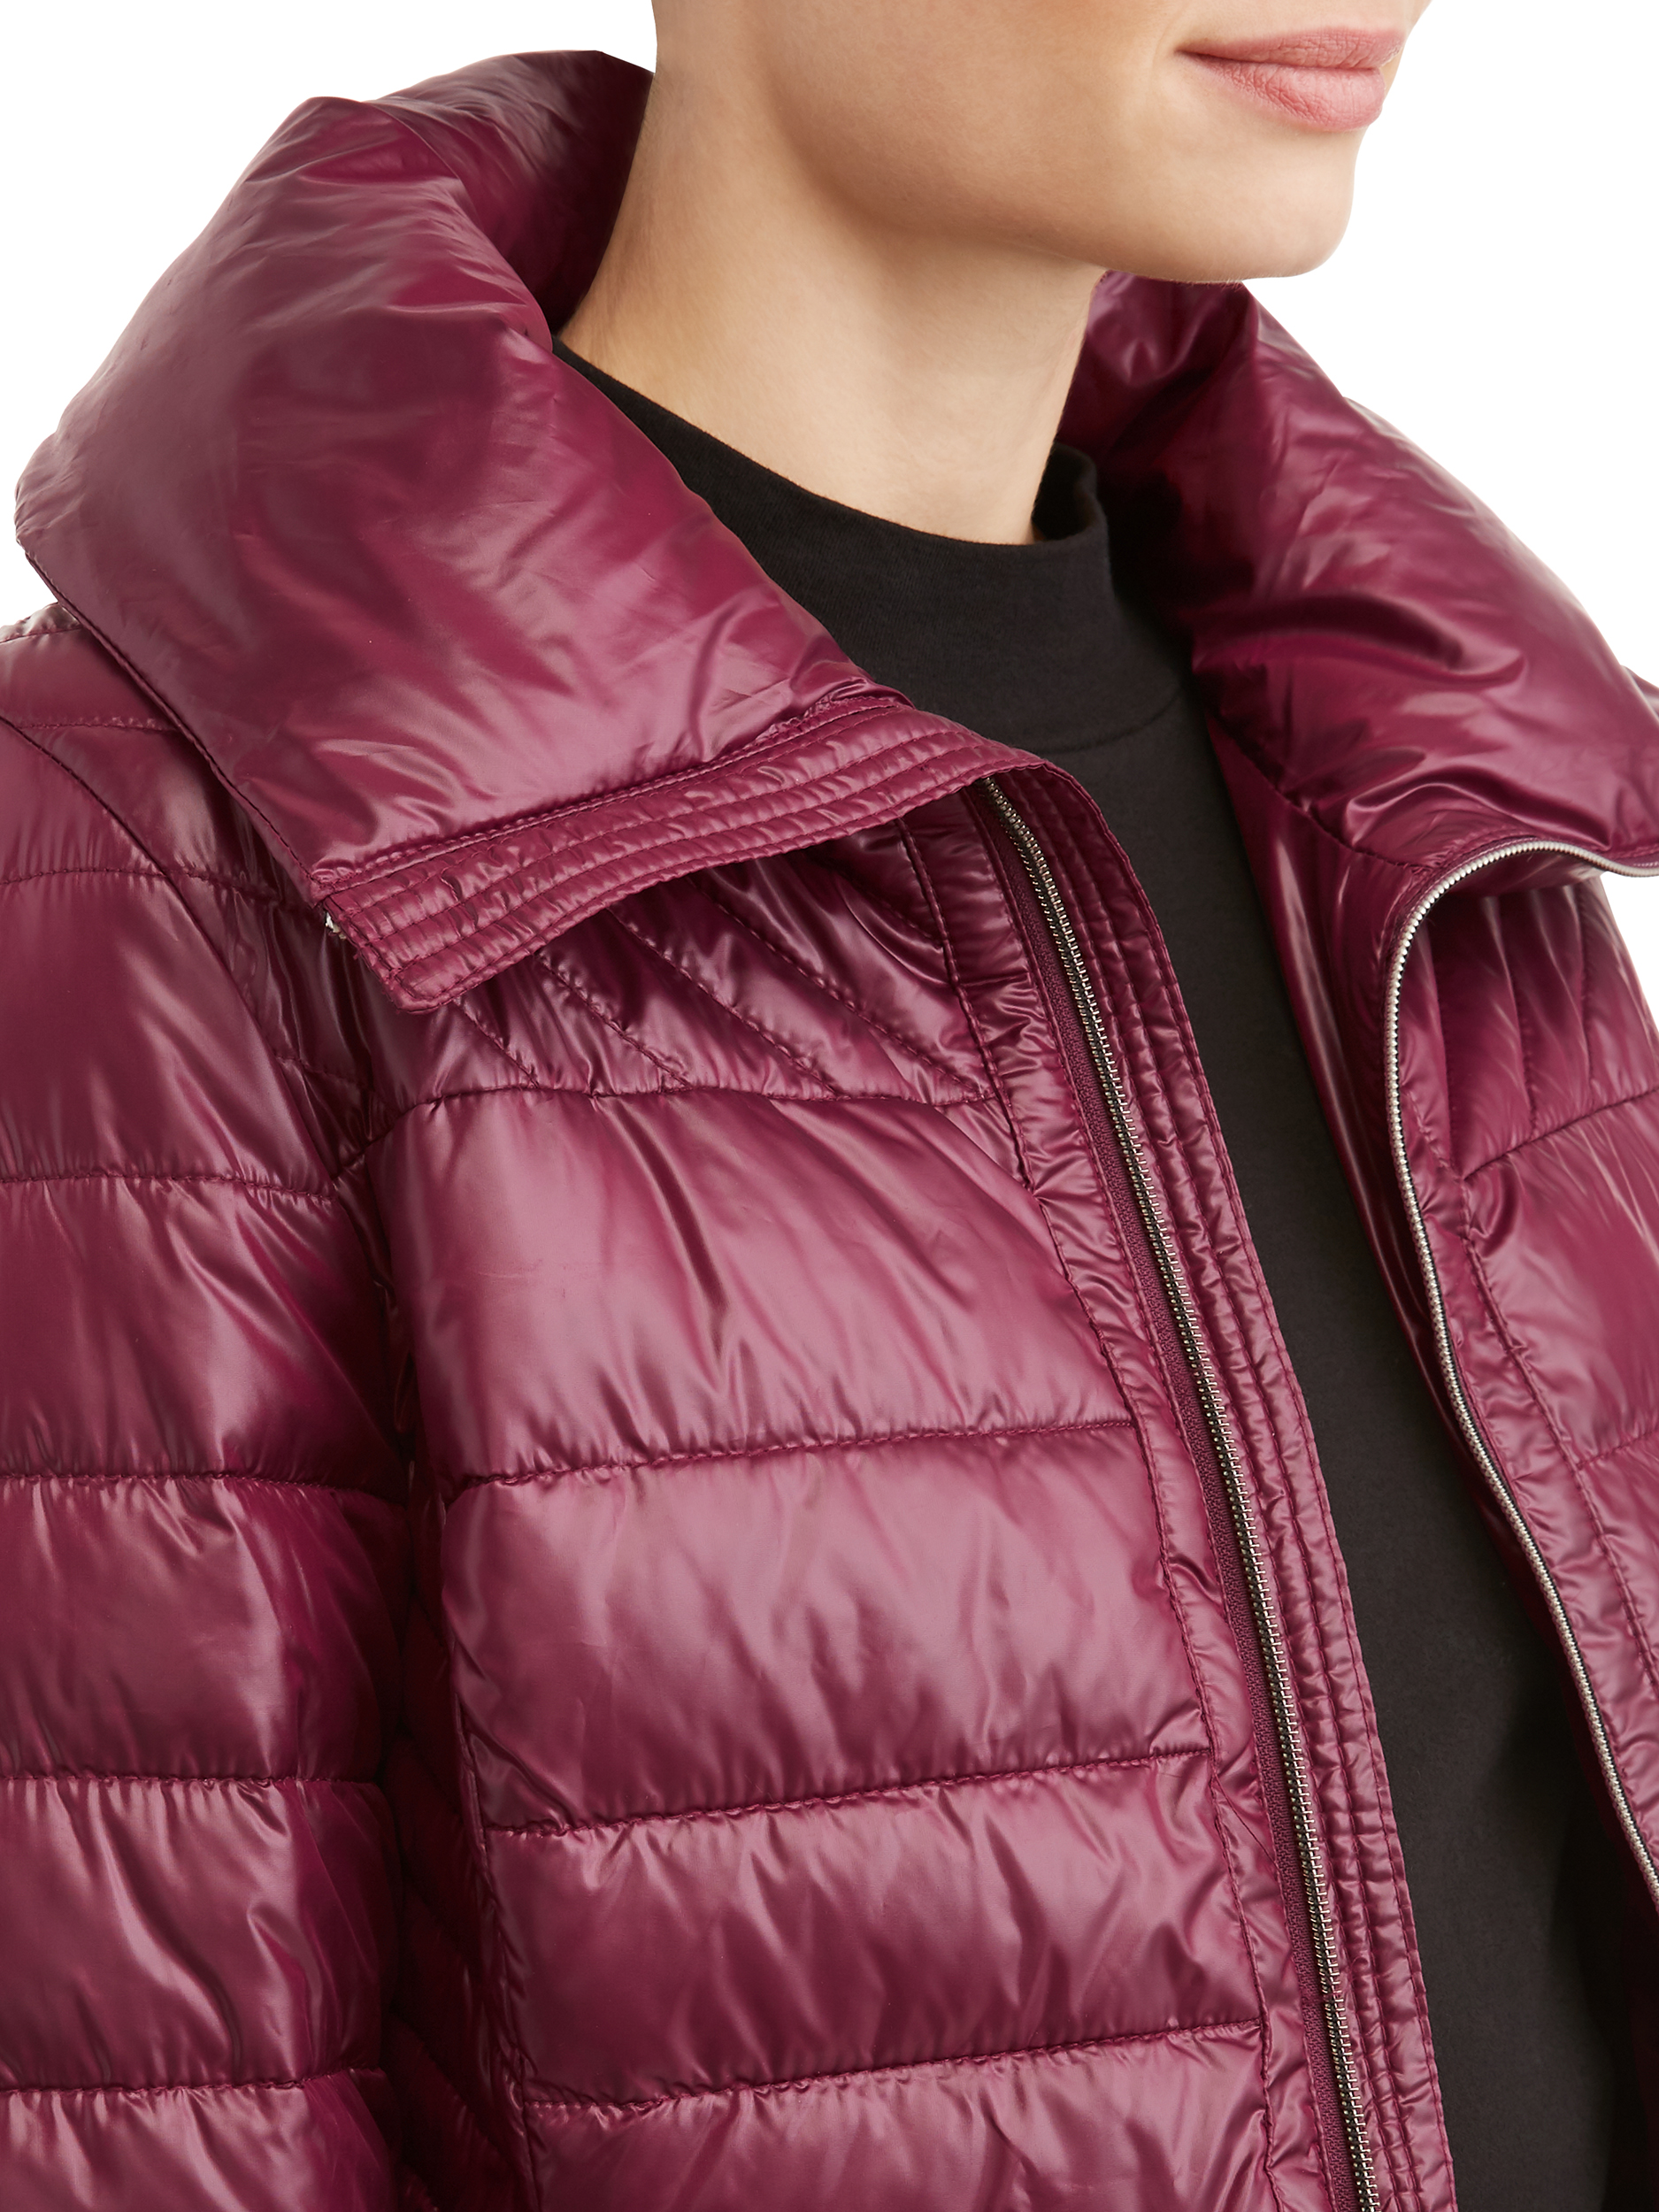 Women's Down Blend Quilted Jacket with Convertible Collar - image 4 of 5